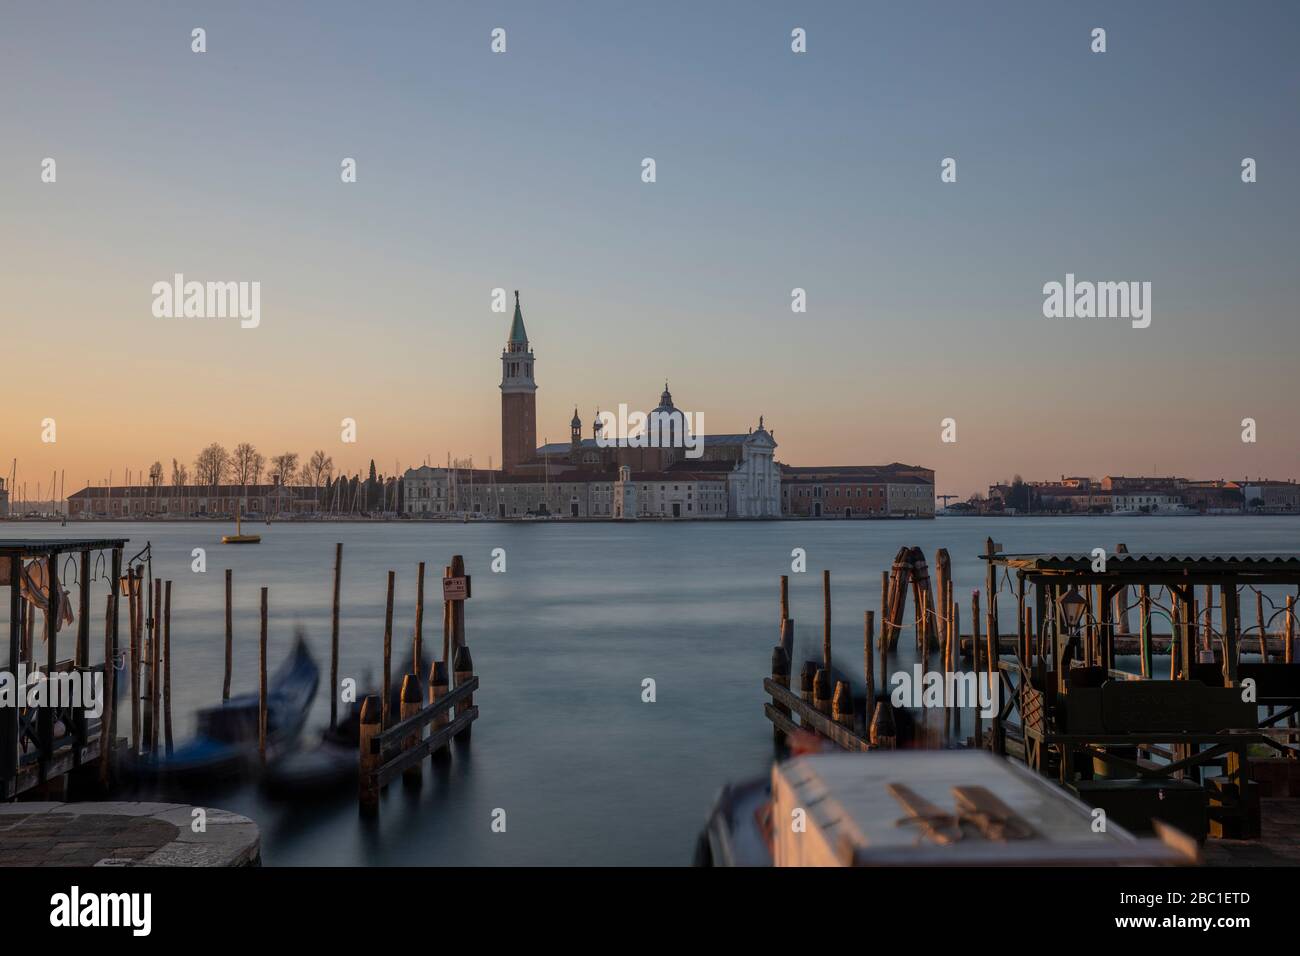 stock and San hi-res photography Alamy maggiore - giorgio at images dusk